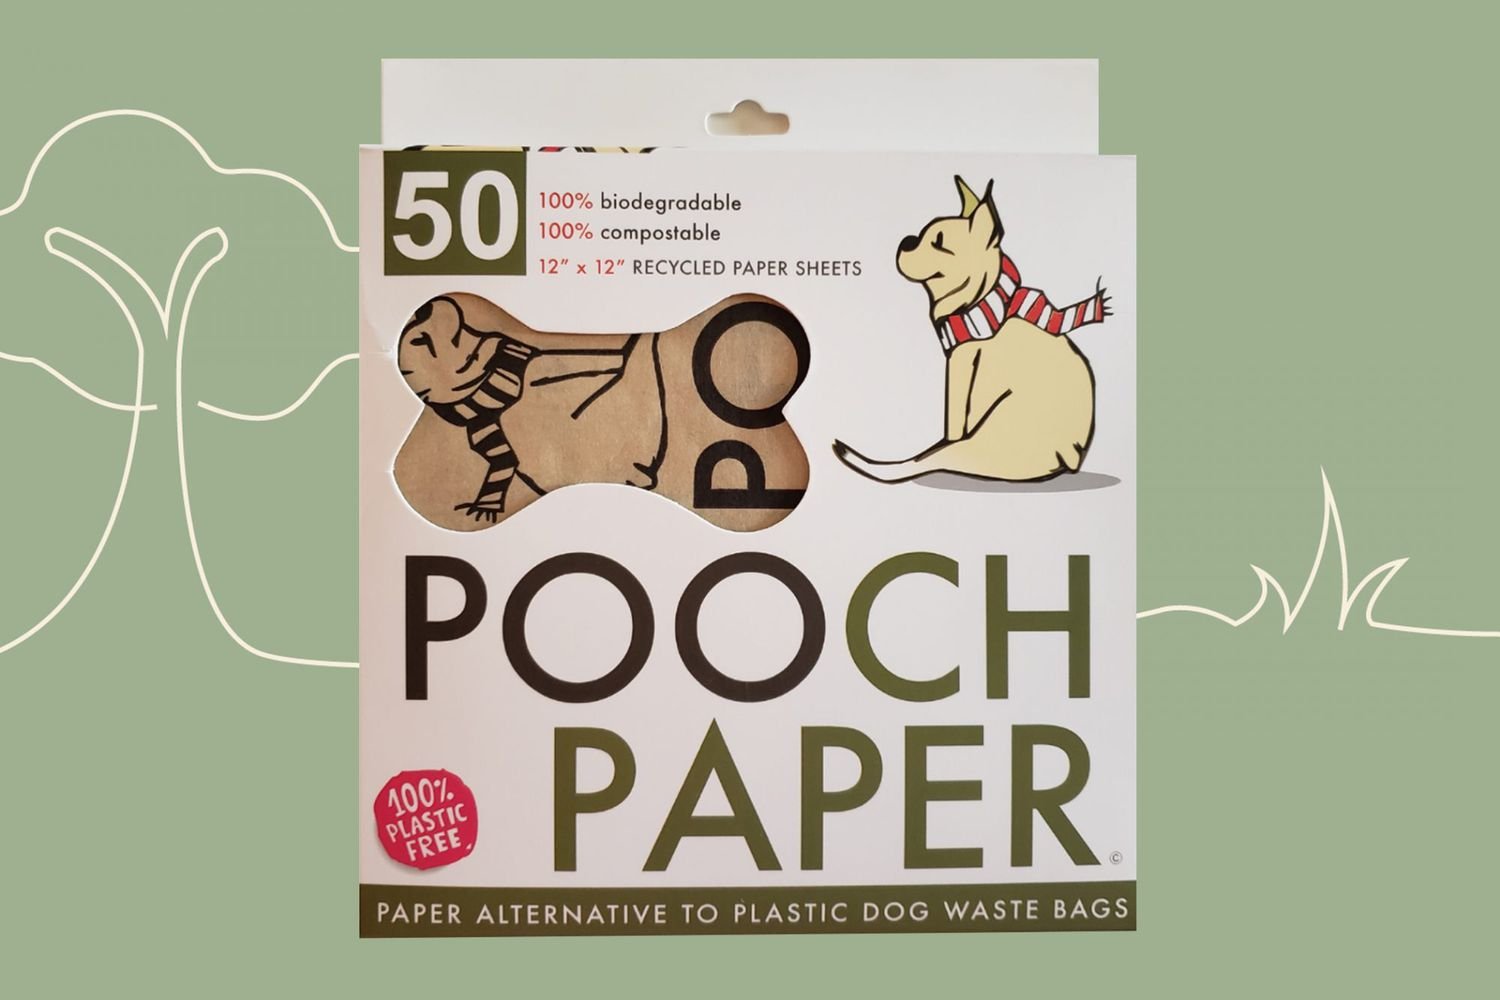 Could This Product Be The Answer to Plastic Dog Waste Bags?